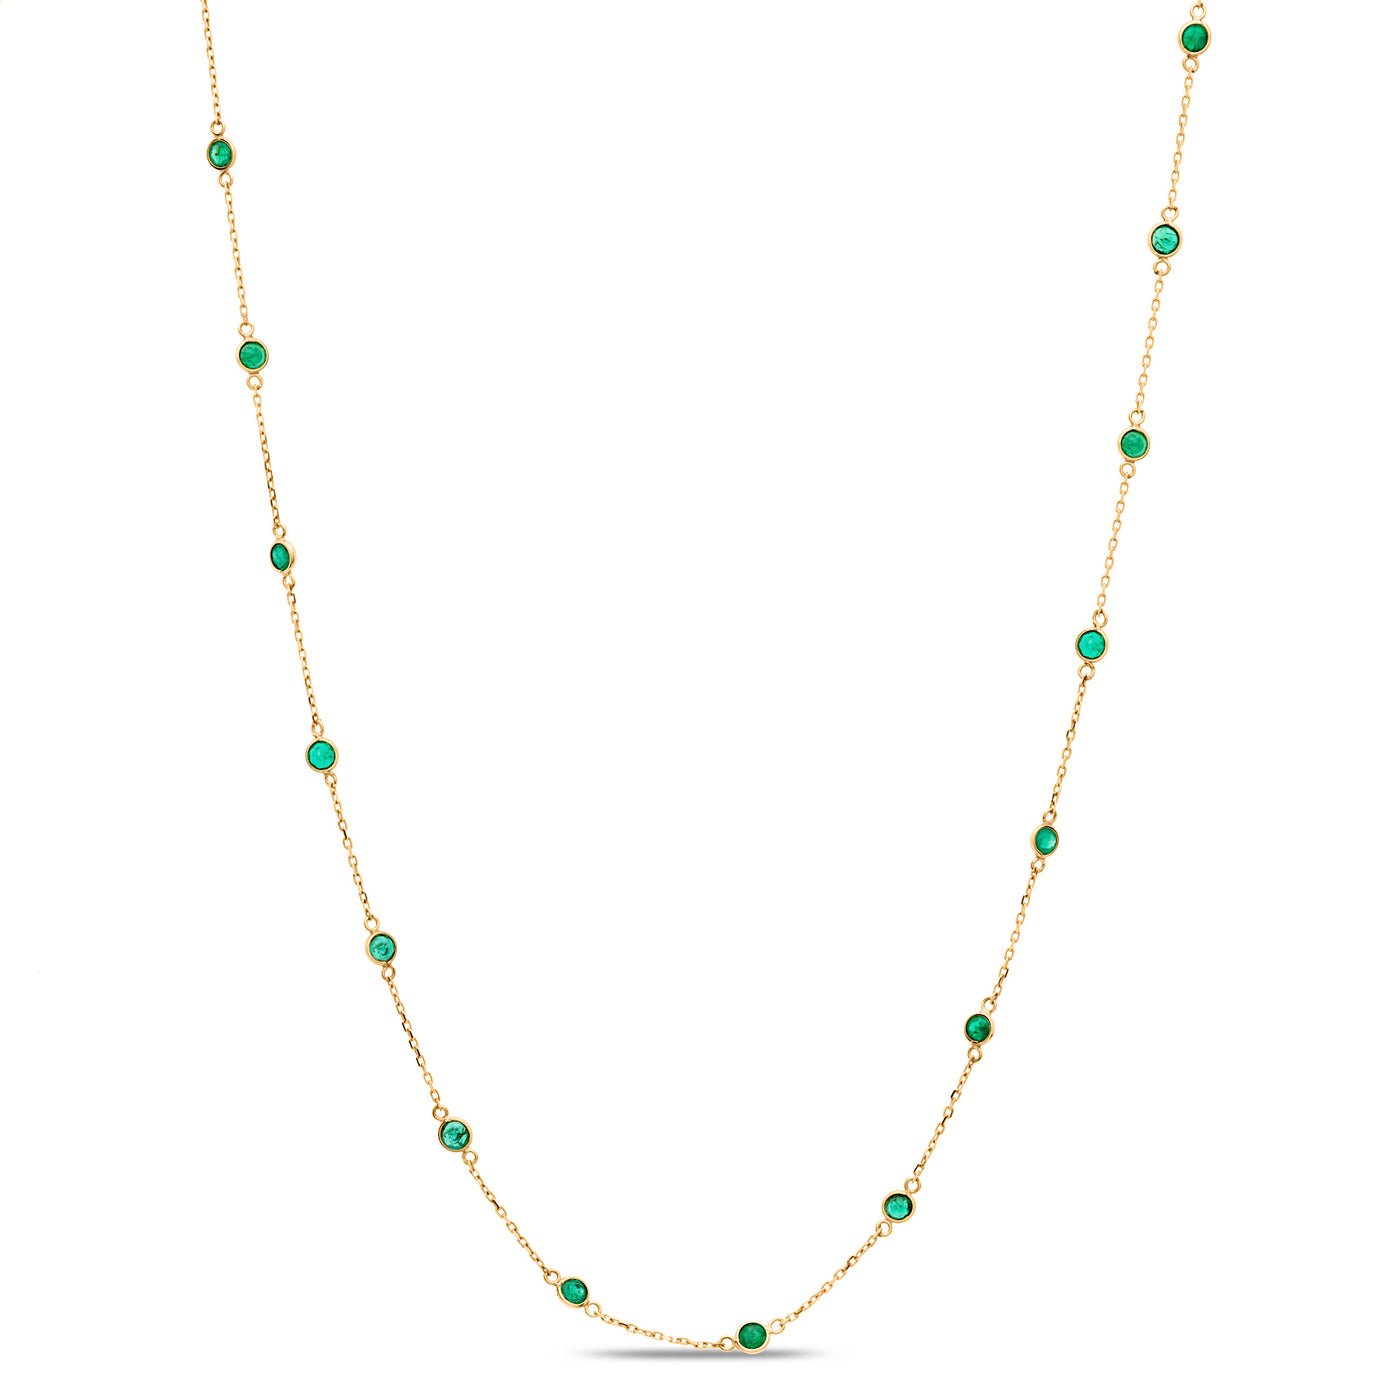 Ruby Rd. Necklace In 18K Yellow Gold